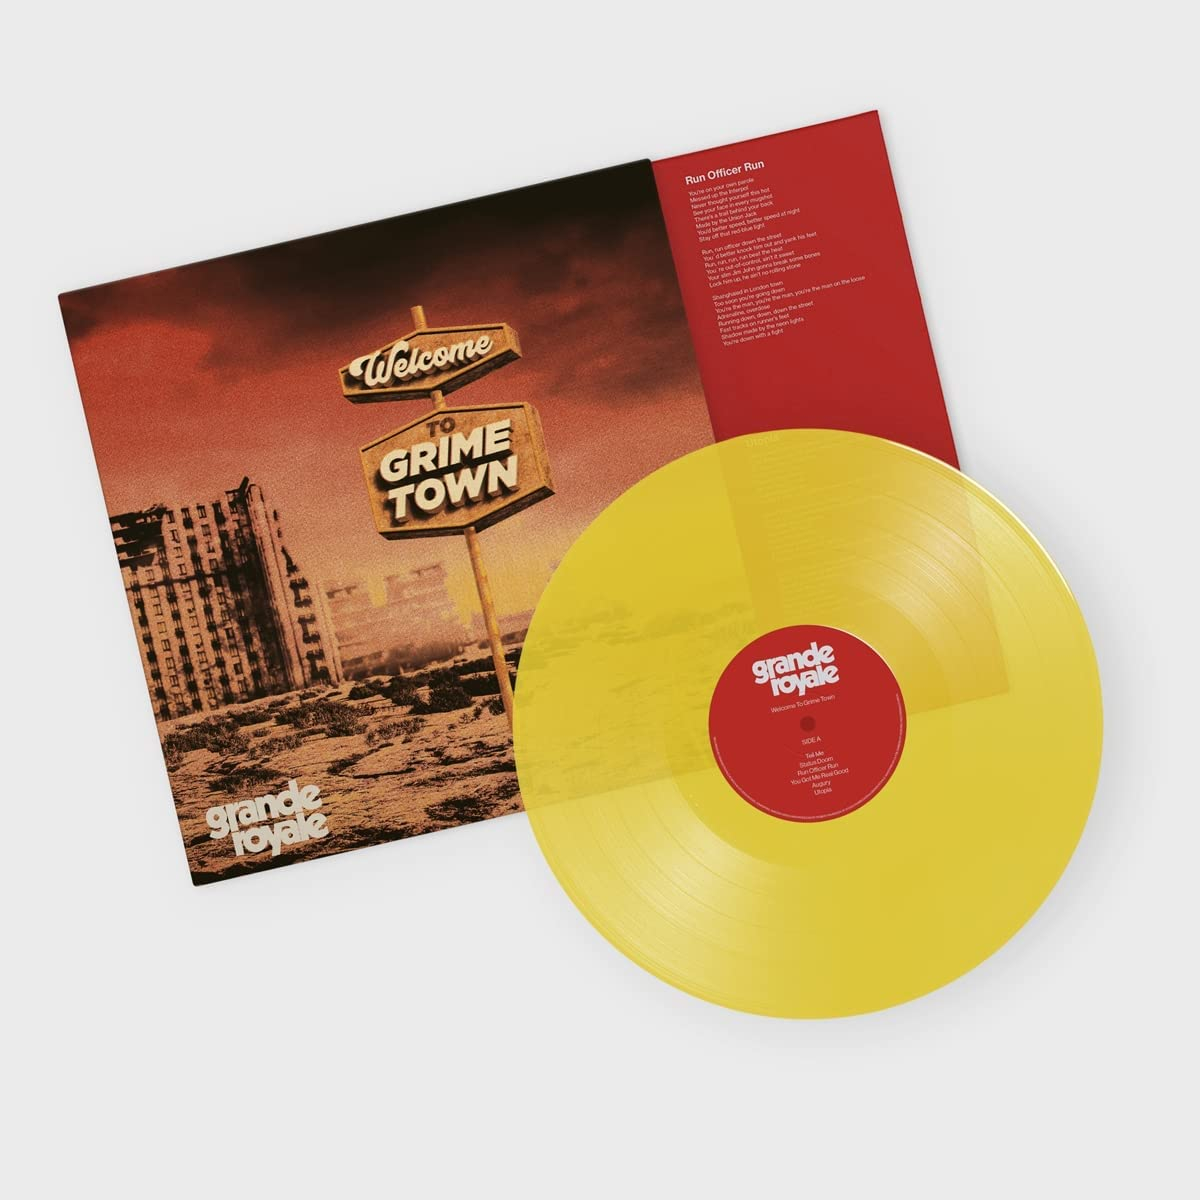 WELCOME TO GRIME TOWN - TRANSP. YELLOW